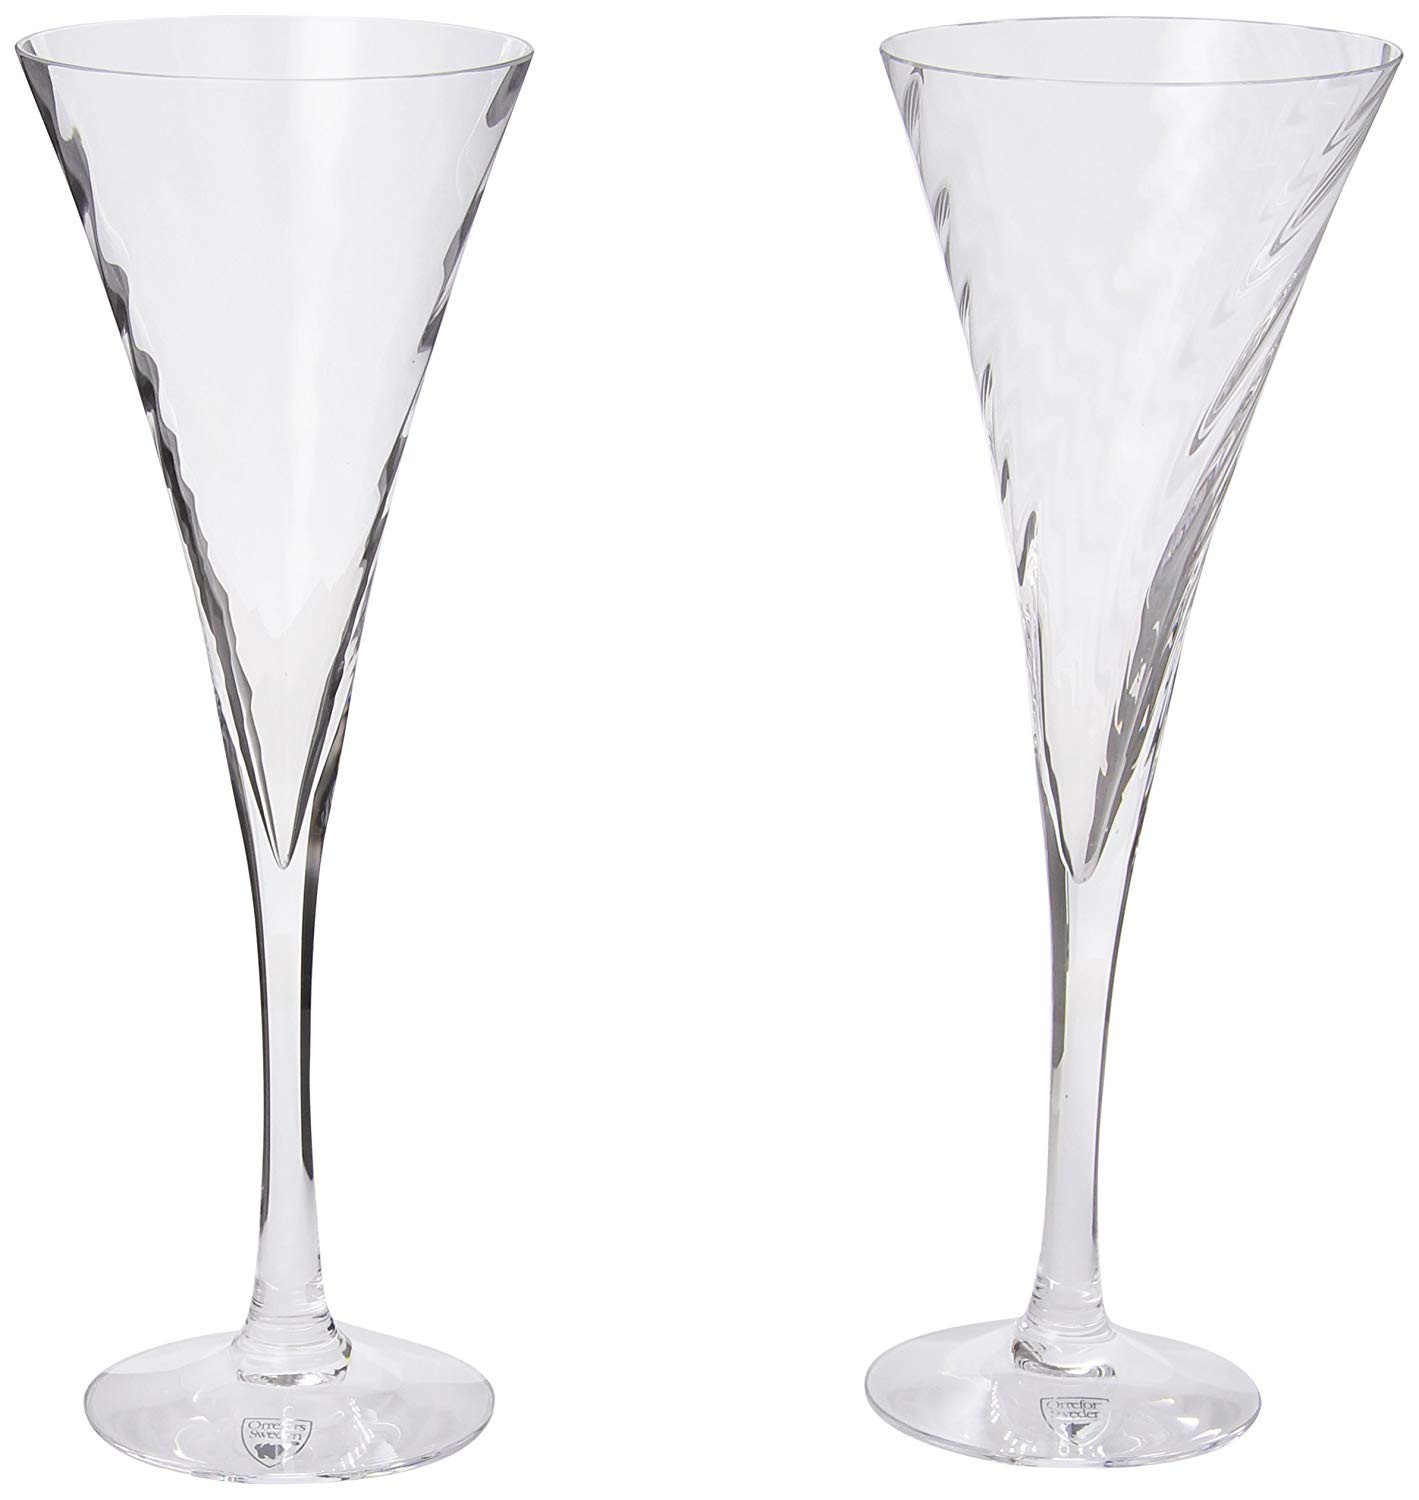 20 Ideal Lenox Masterpiece Small Vase 2024 free download lenox masterpiece small vase of amazon com orrefors helena 8 4 5 ounce flute set of 2 champagne pertaining to amazon com orrefors helena 8 4 5 ounce flute set of 2 champagne flutes mixed dri